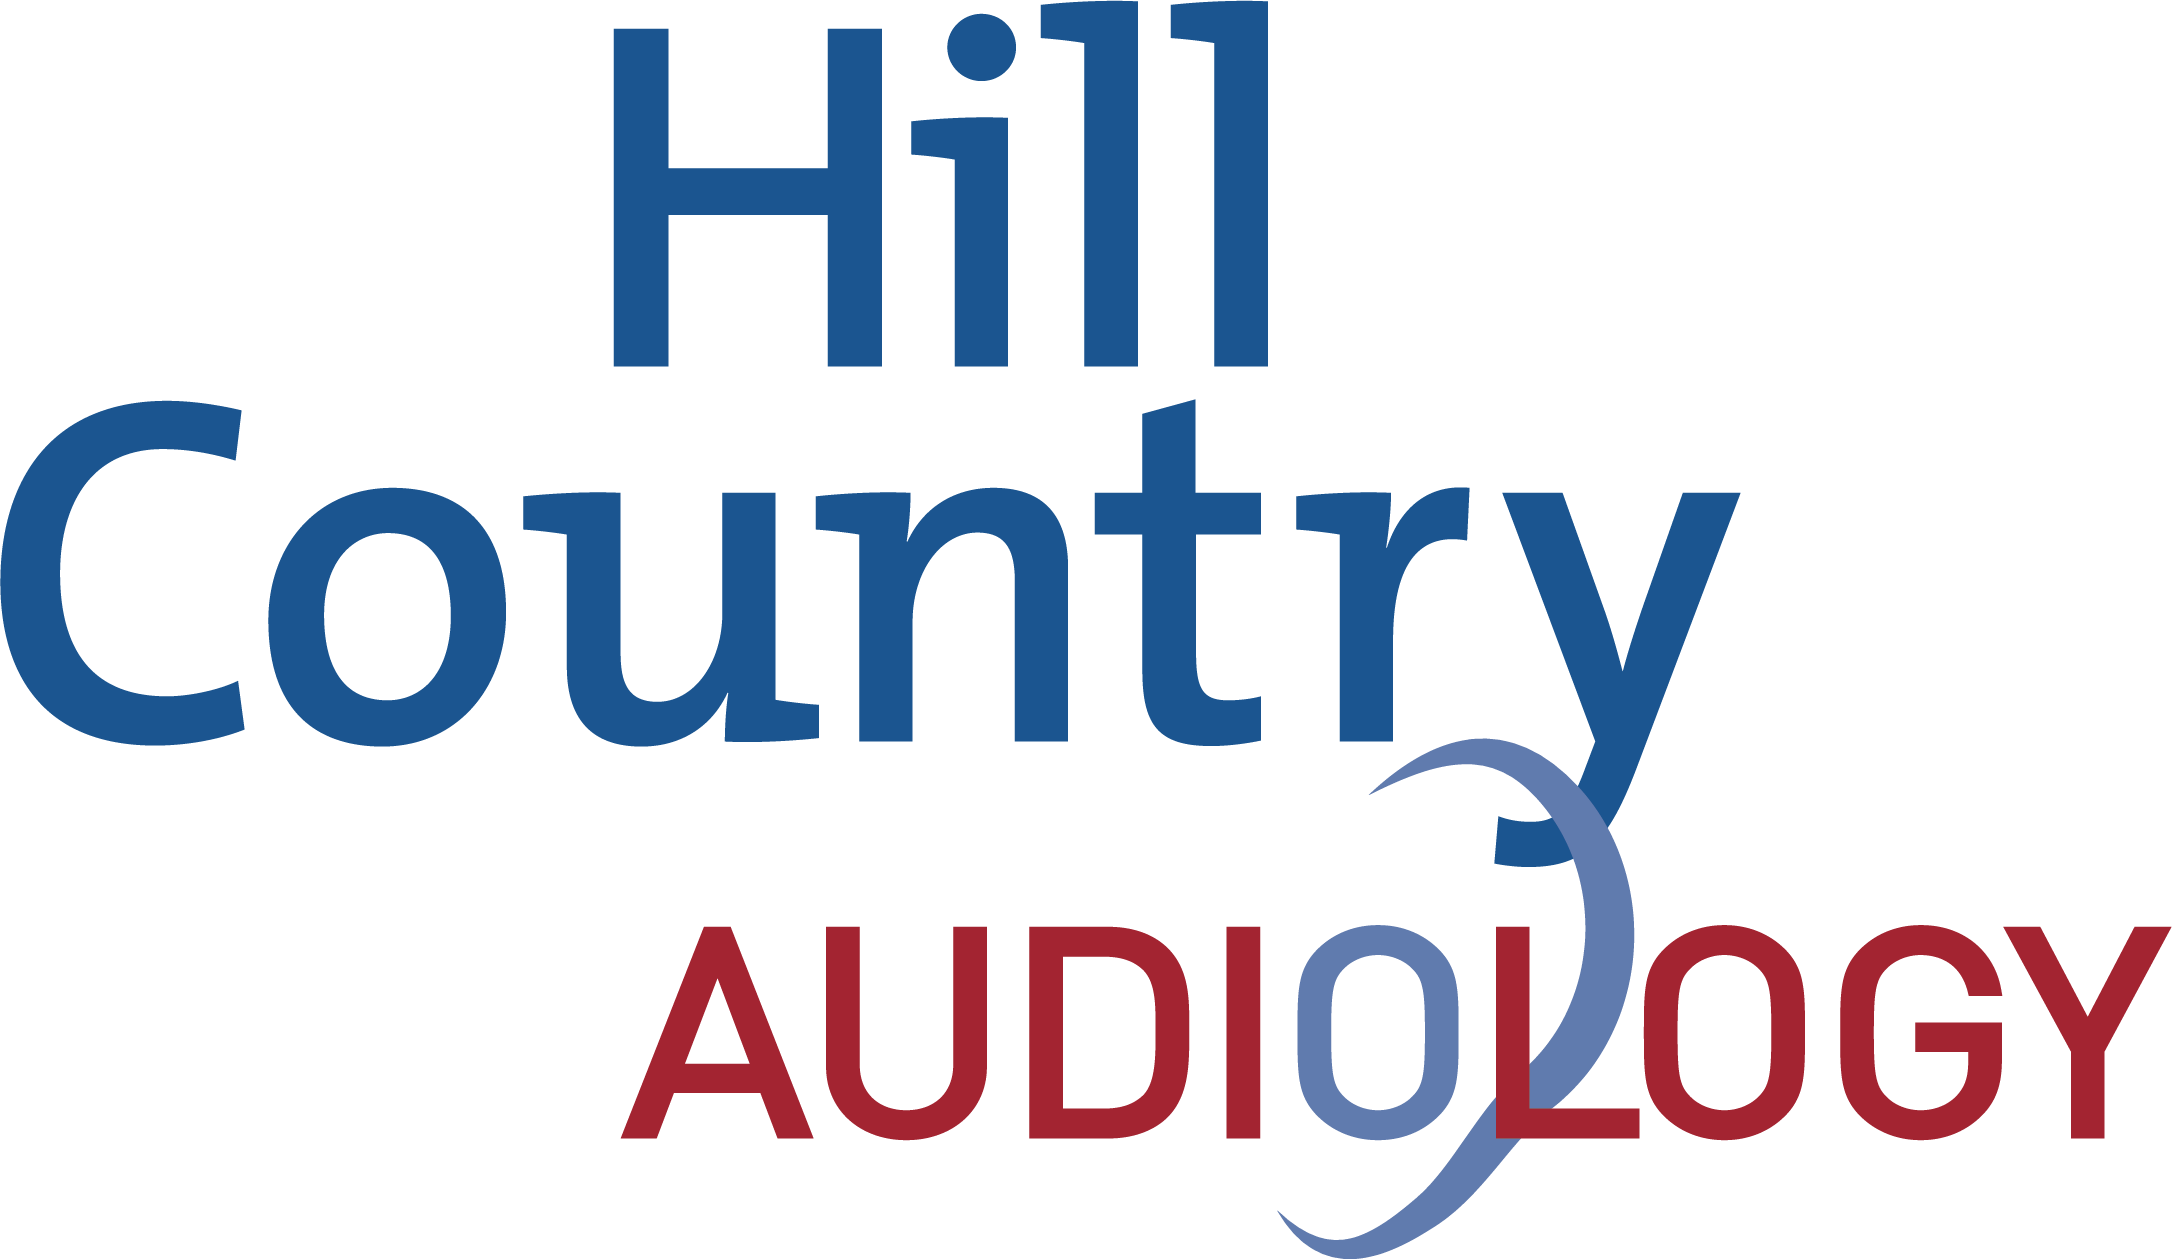 Hill Country Audiology - Graphic Design (2172x1259)